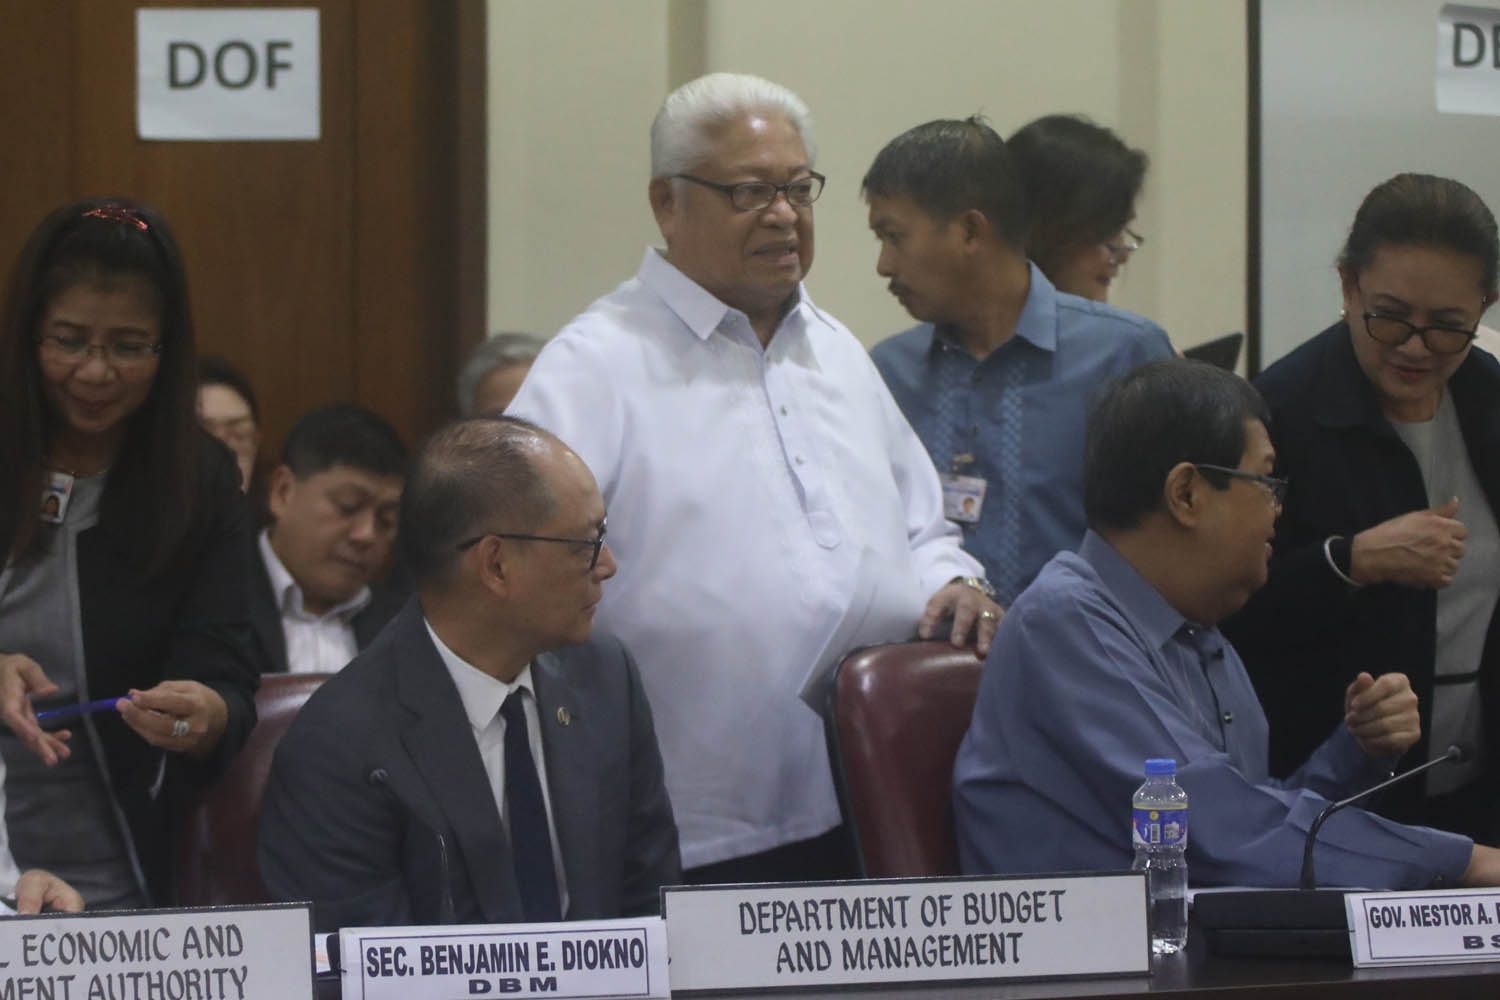 During House committee briefing, Lagman asks: Who is the minority?